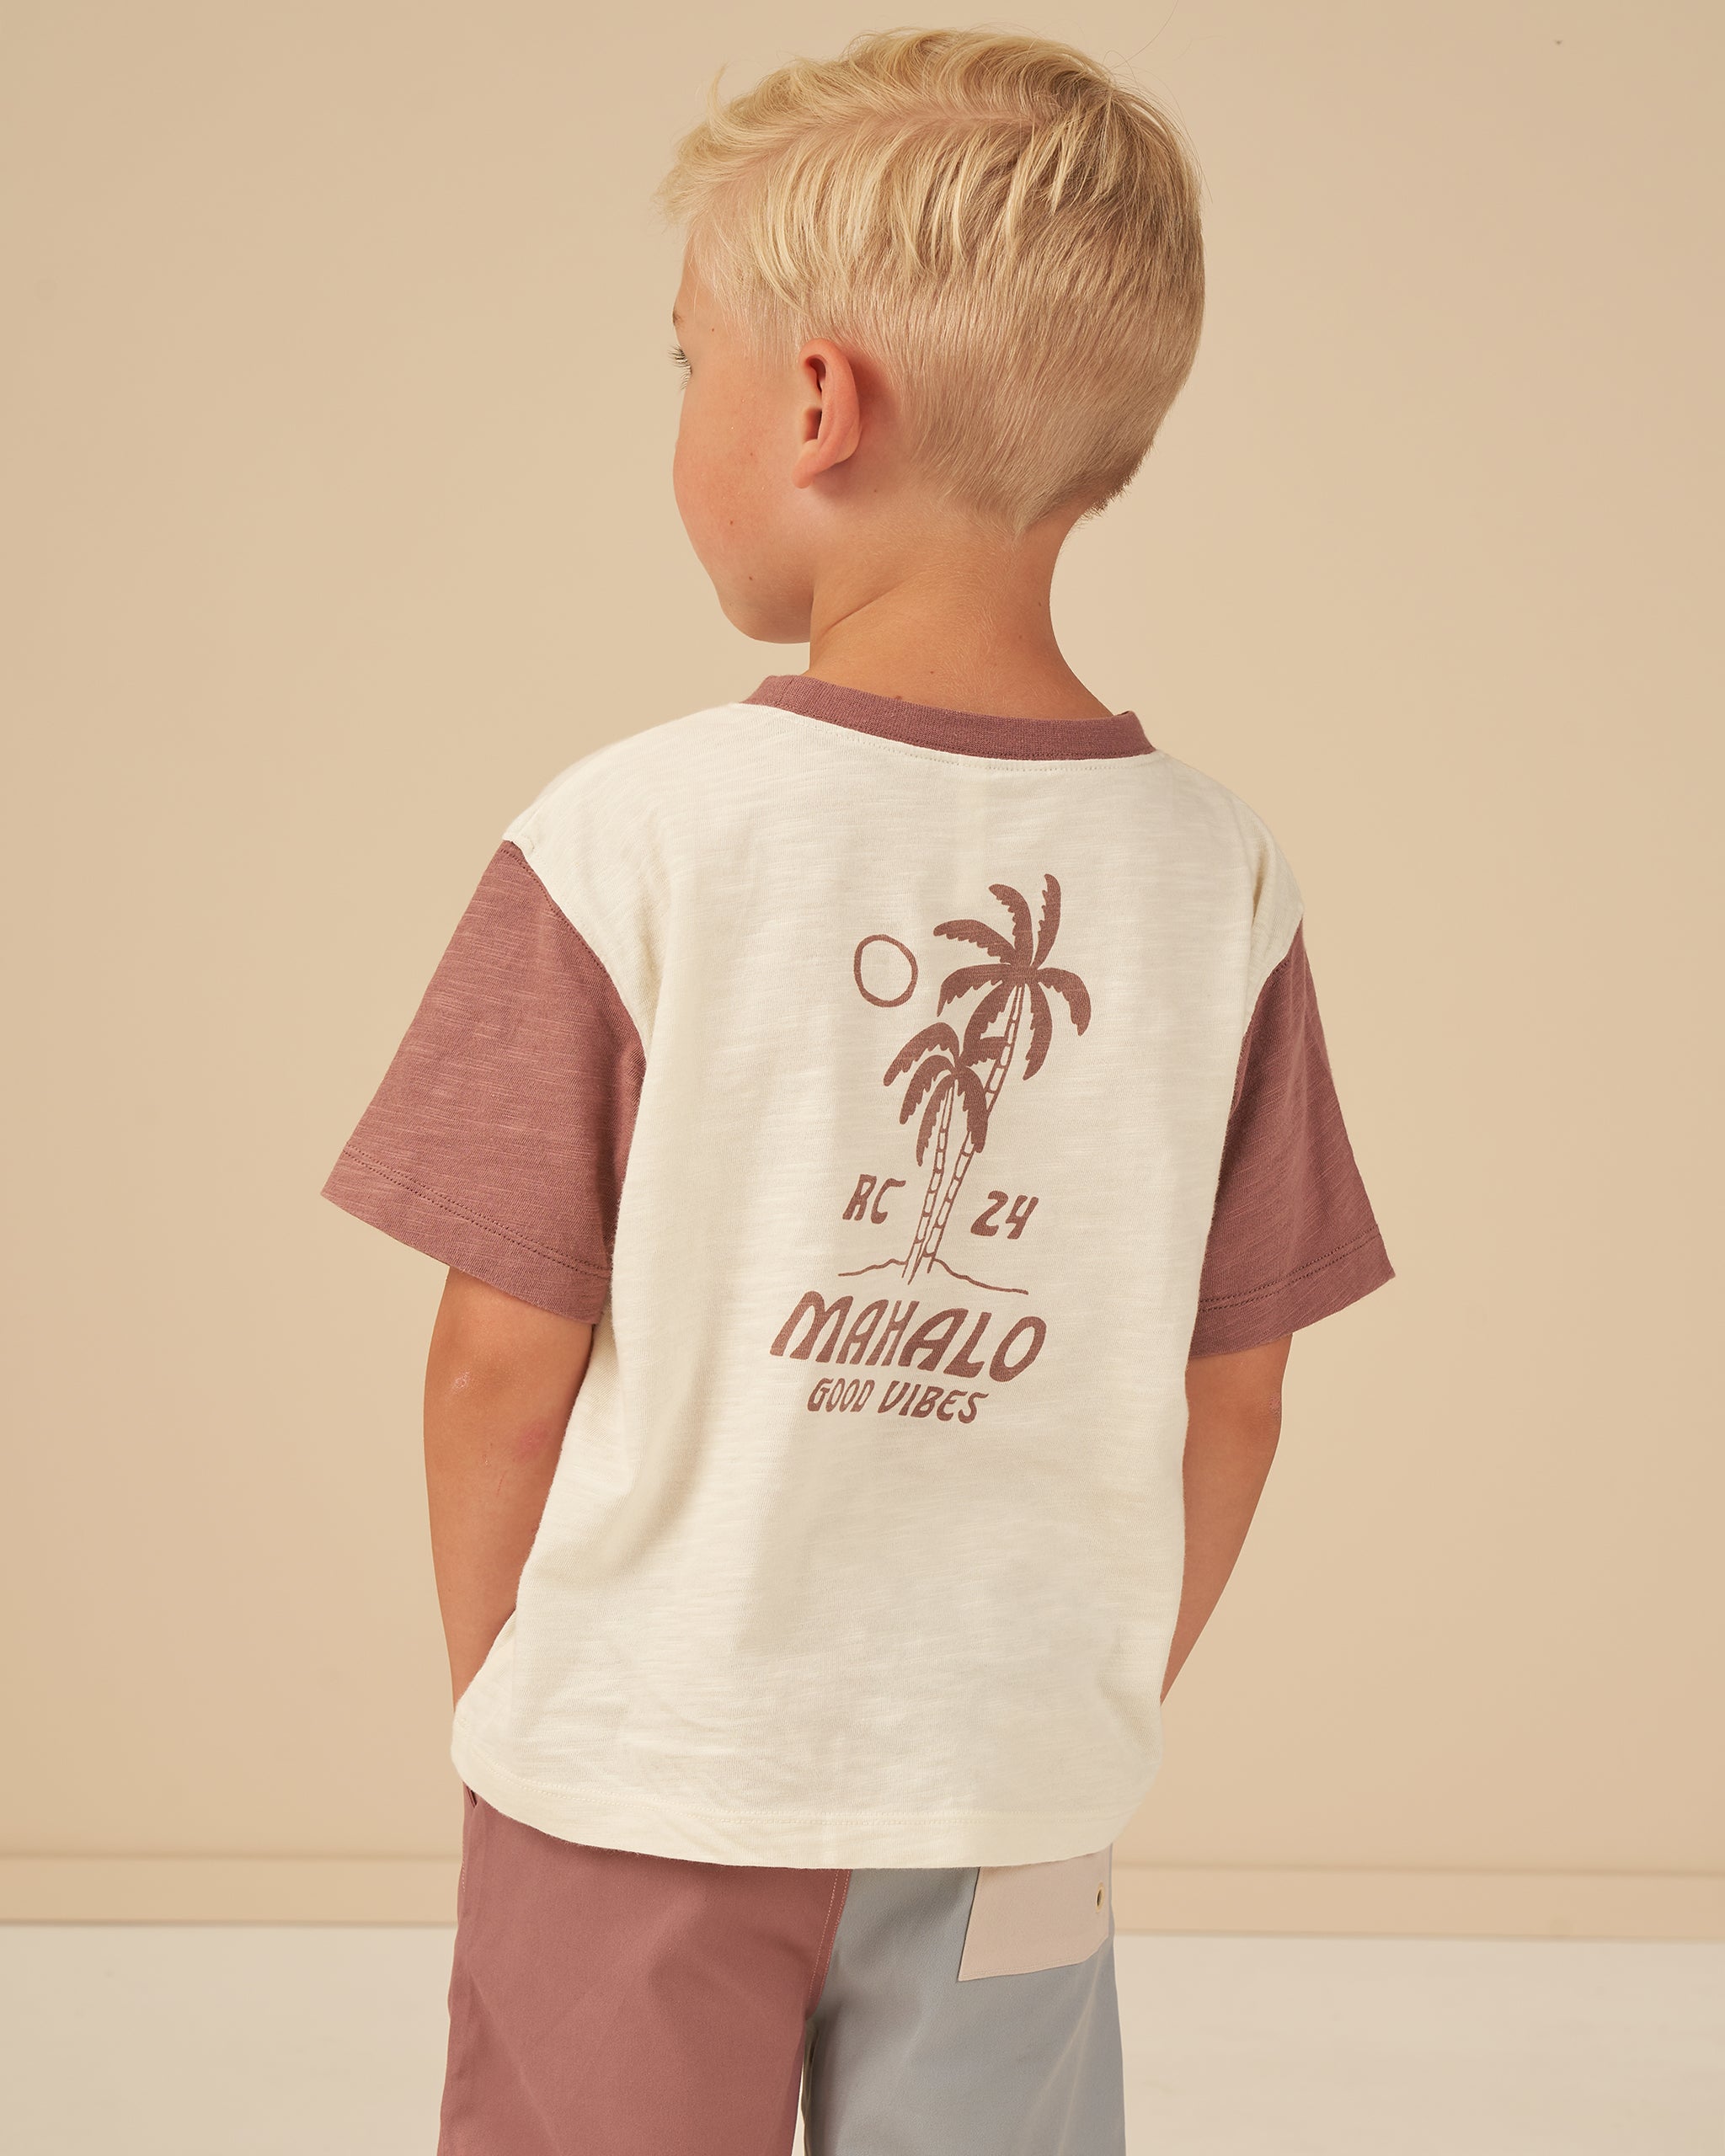 Contrast Short Sleeve Tee || Mahalo - Rylee + Cru | Kids Clothes | Trendy Baby Clothes | Modern Infant Outfits |